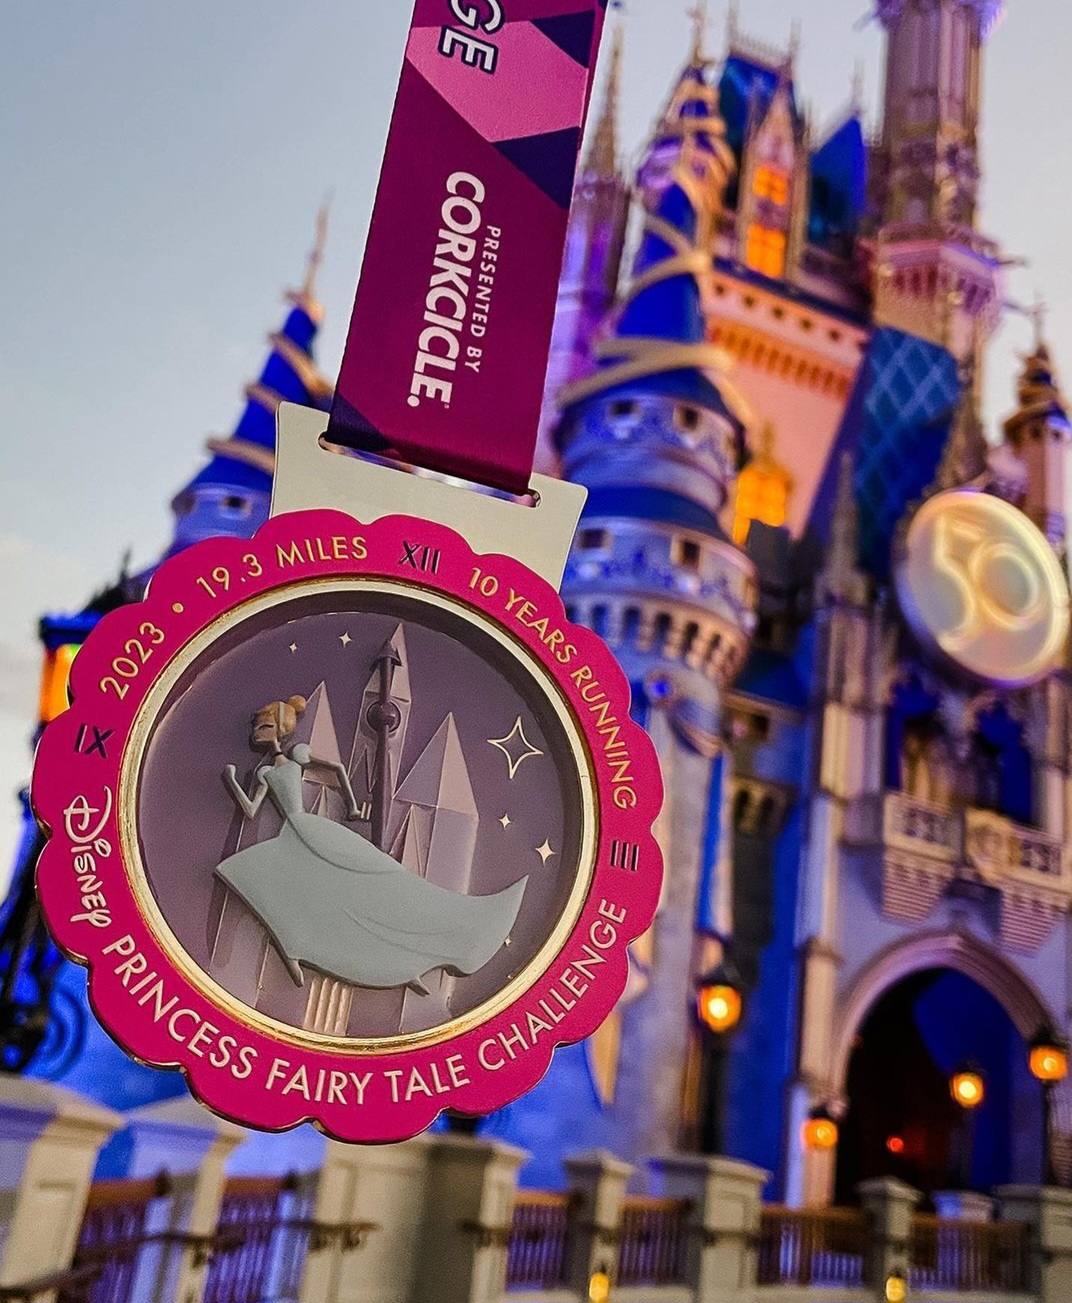 Are you a runner? Do you love Disney movies and theme parks? If so, then the Walt Disney World Weekend Marathon Races are for you! This Disney entertainment event is a series of races that takes place over the course of three days at the Walt Disney World Resort in Orlando, Florida. There are races …